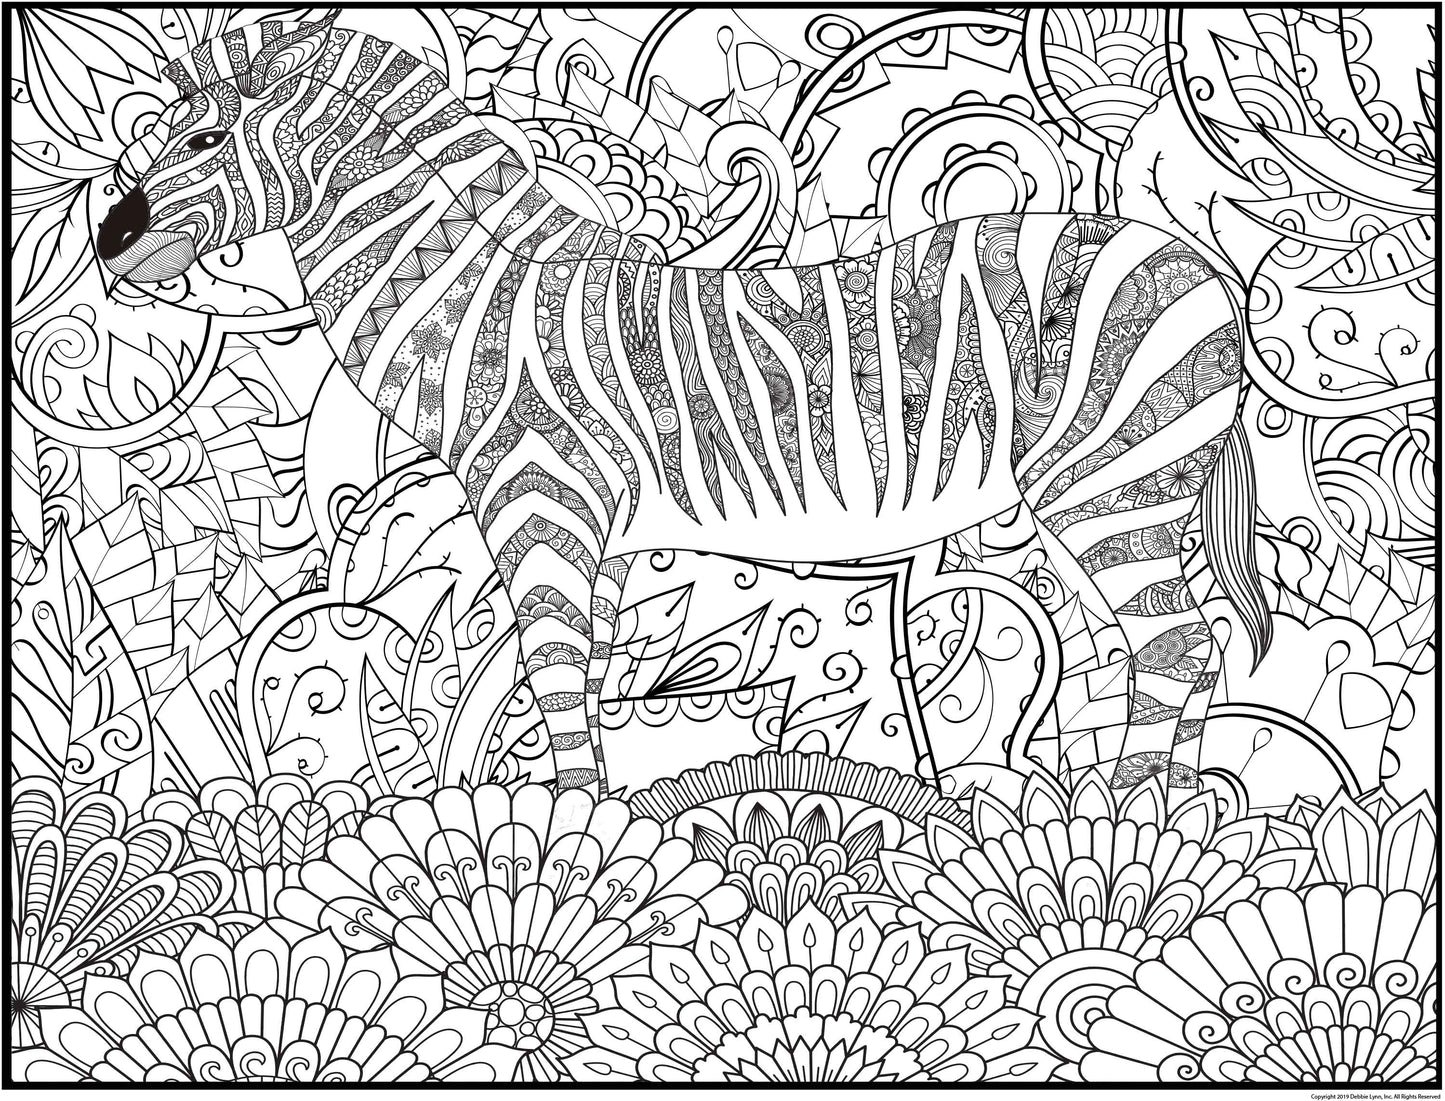 Zebra Personalized Giant Coloring Poster 46"x60"